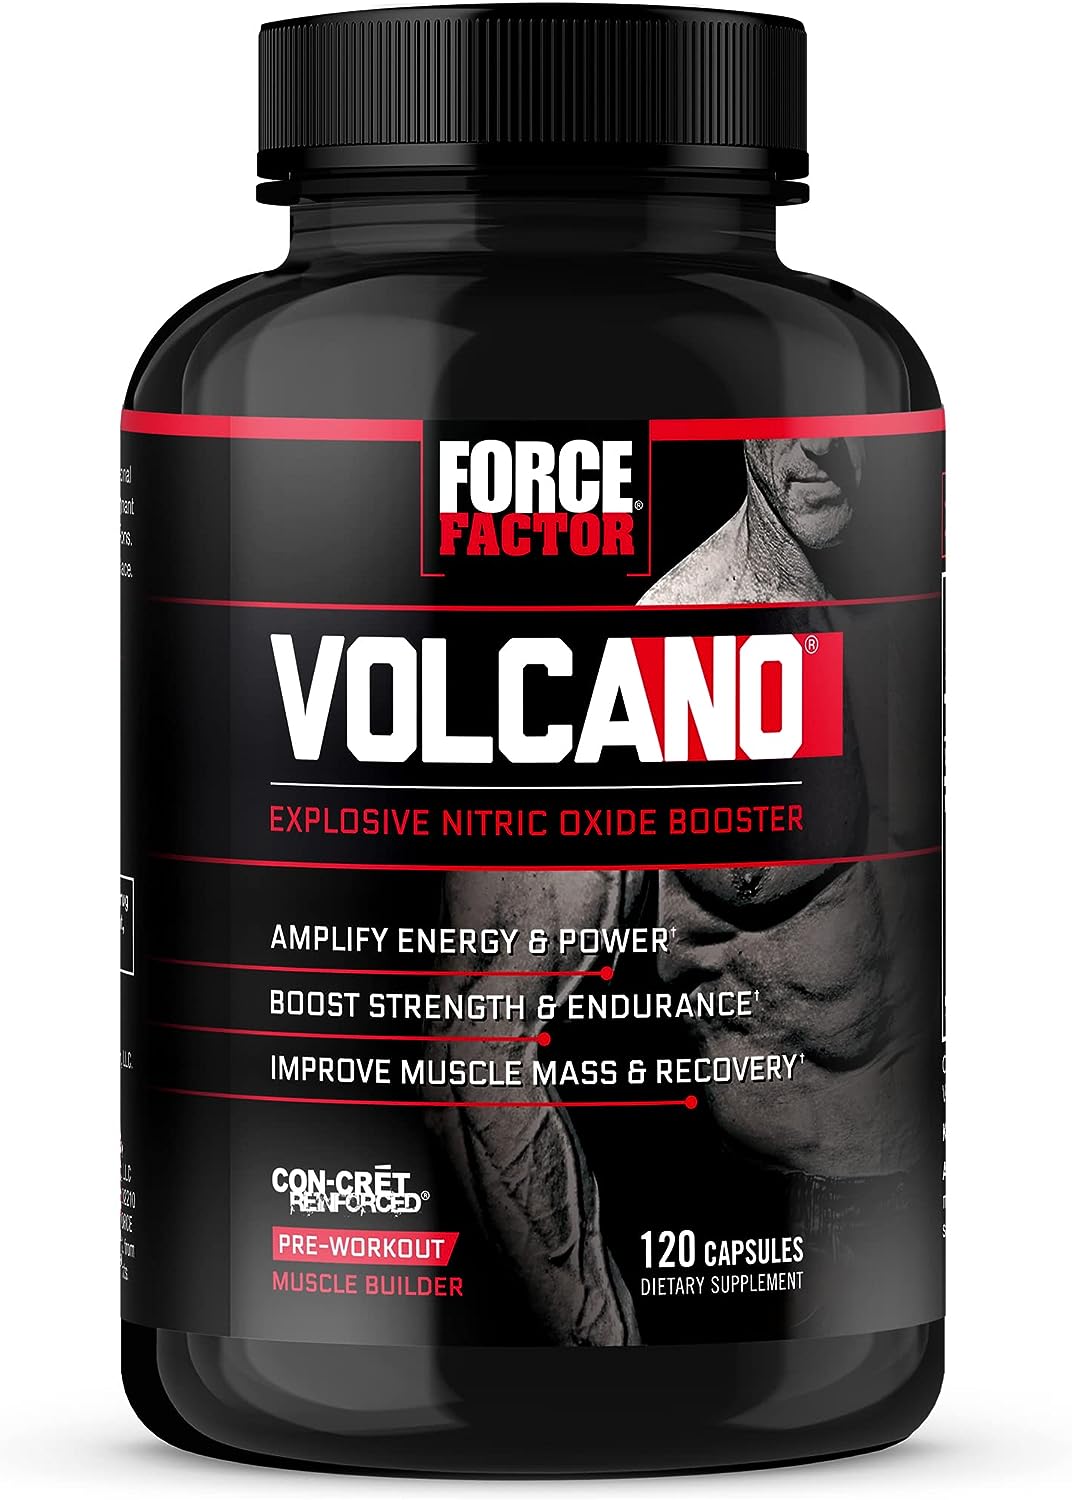 Force Factor Volcano Pre Workout Nitric Oxide Booster Supplement for Men with Creatine and L-Citrulline to Boost and Energy, Help Build Muscle, Better Pump and Workout, 120 Capsules